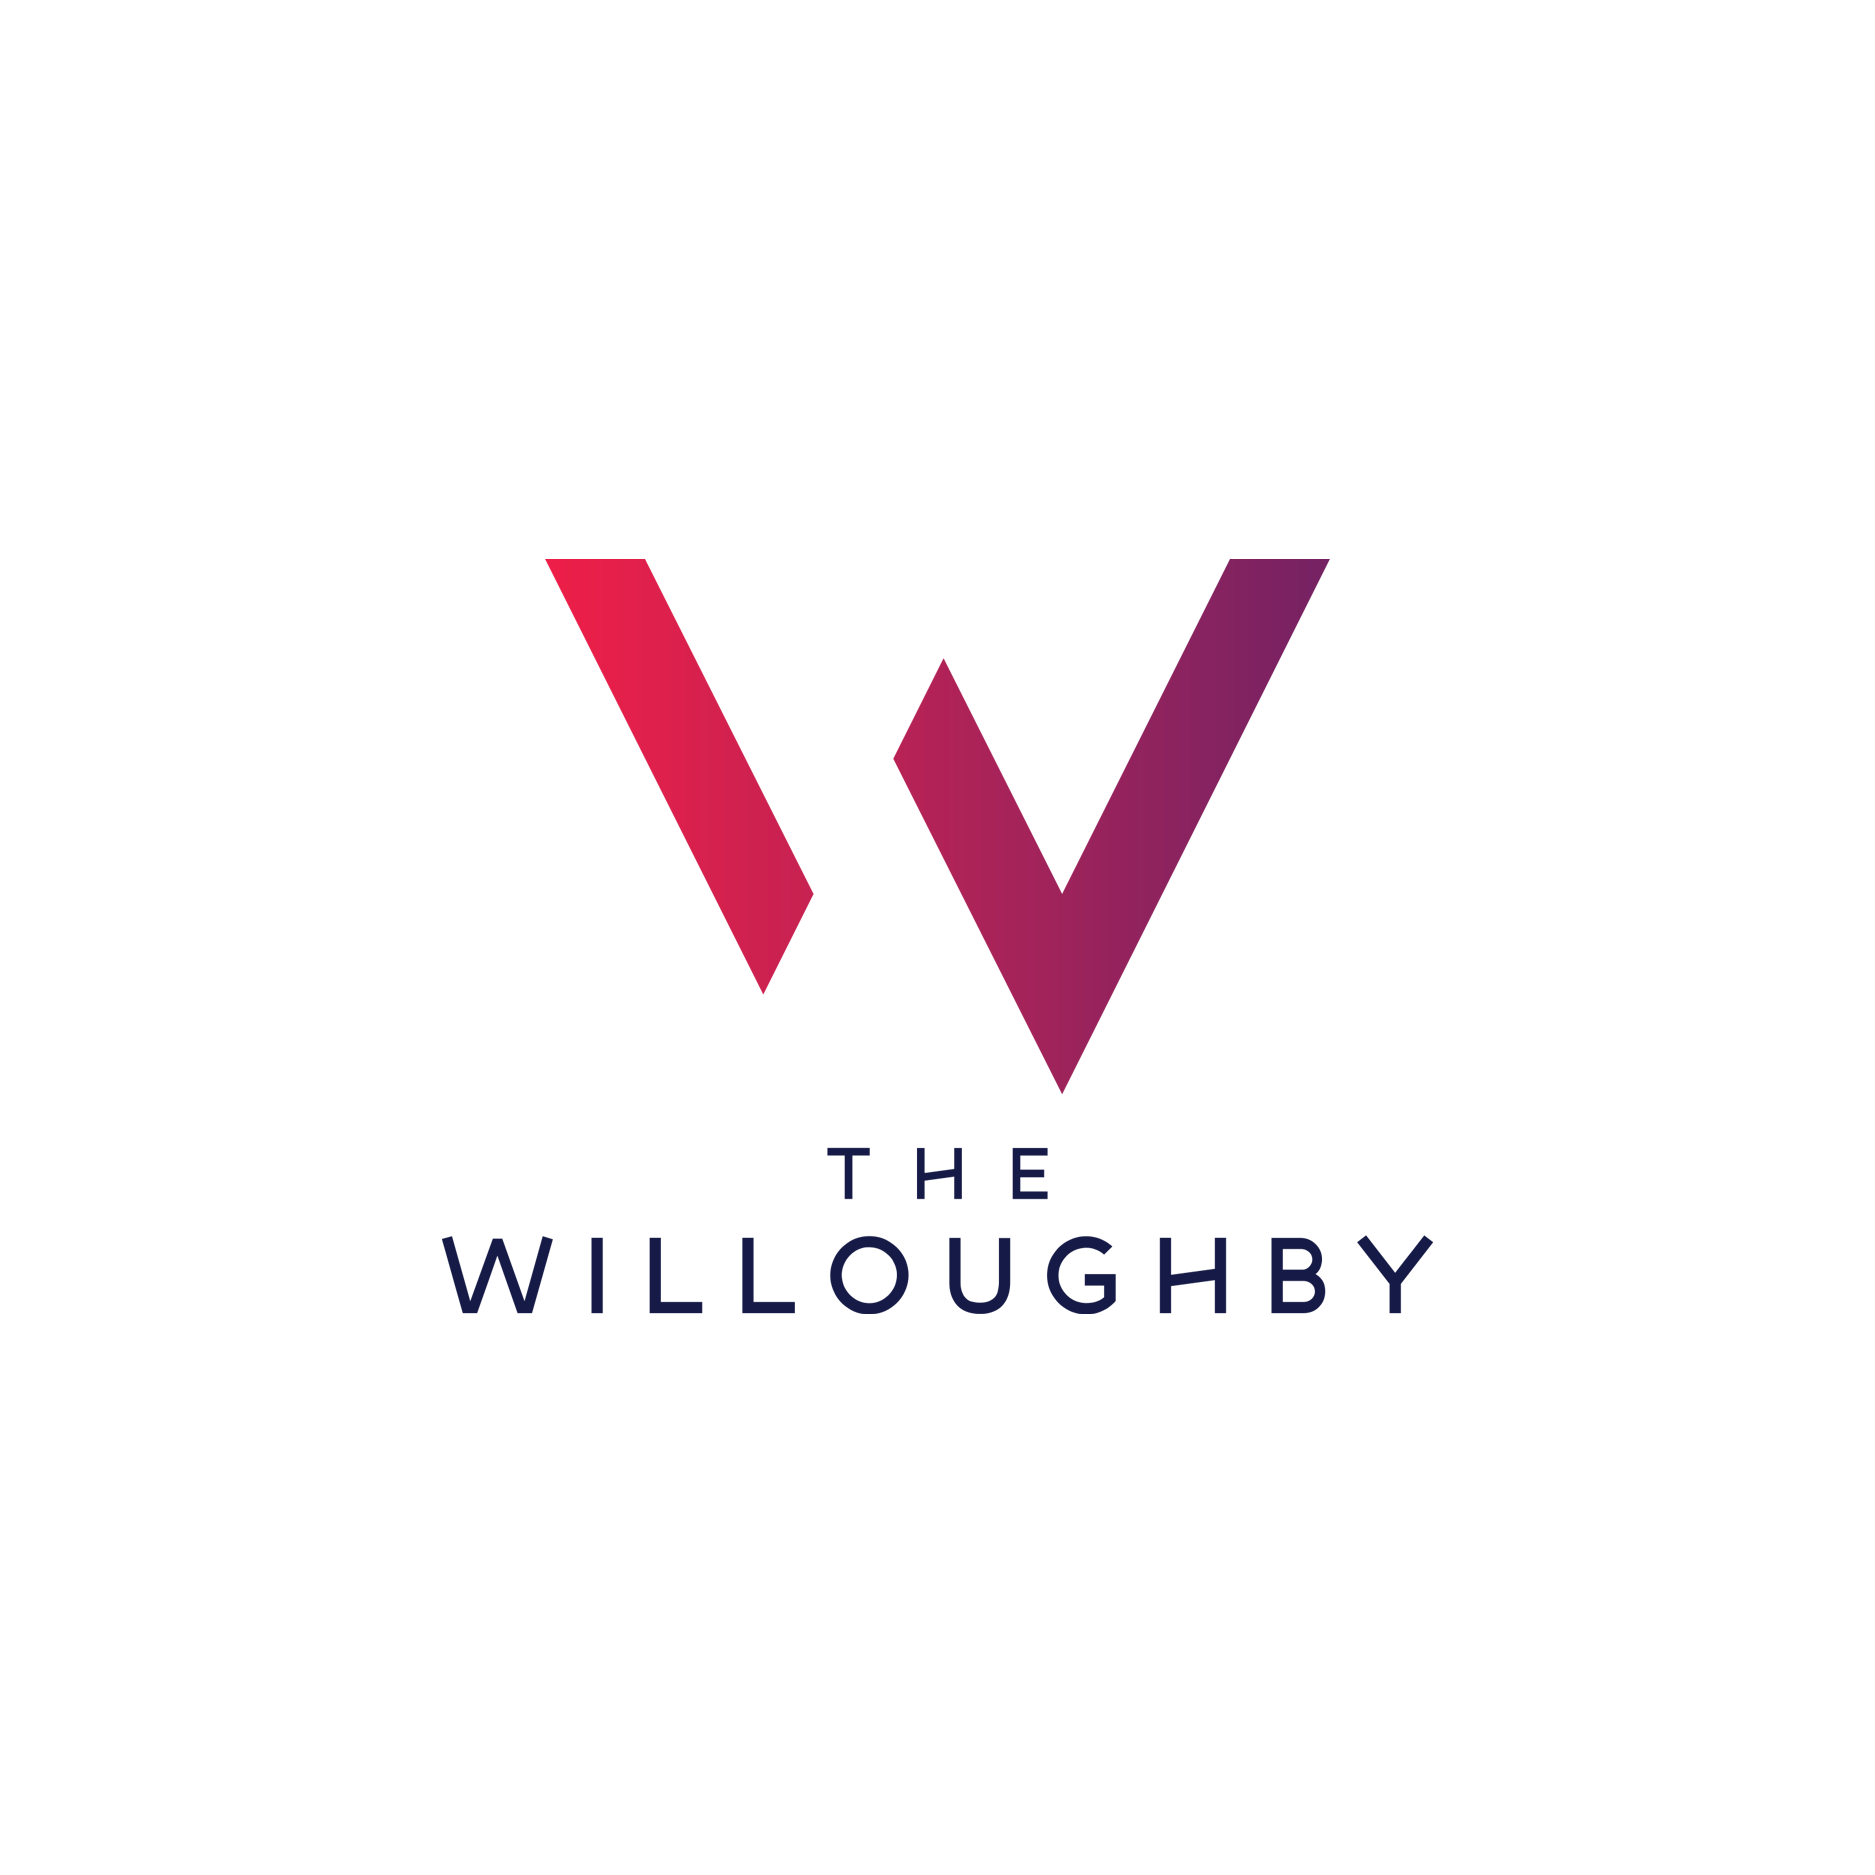 The Willoughby